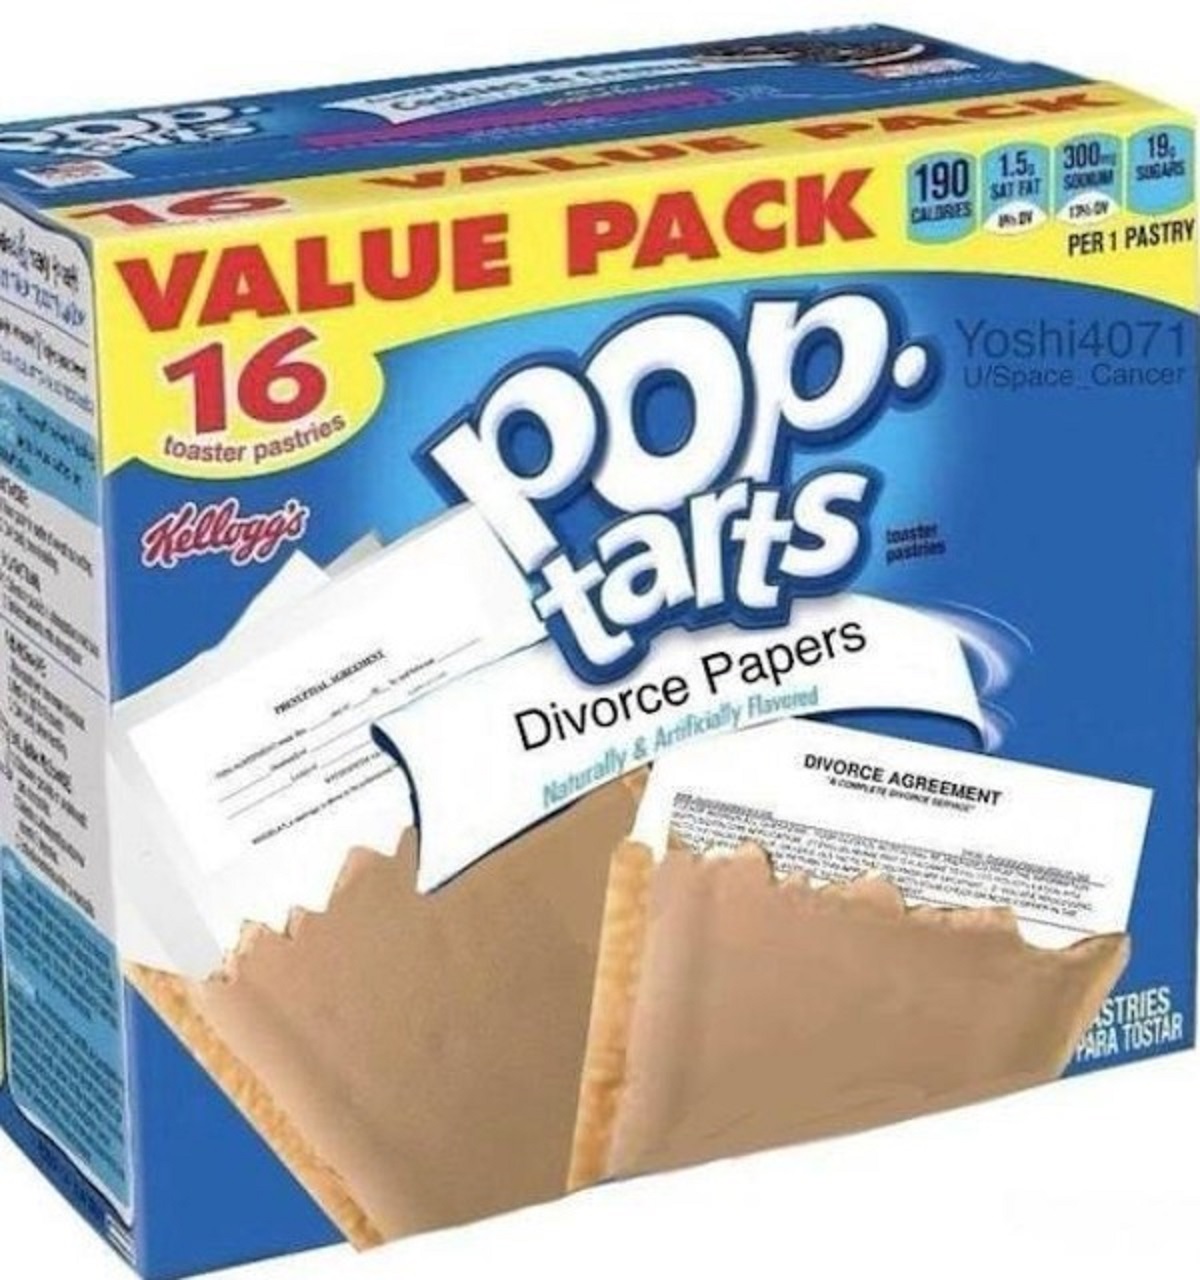 Value Pack 19 16 toaster pastries Kellogg's pop. tarts Divorce Papers Naturally&Artificially Flavored pastries Divorce Agreement Calories 19 Sat Fat Som Sugars 17A6 Ov Per 1 Pastry Yoshi4071 USpace_Cancer wwwwk. Ca Stries Para Tostar